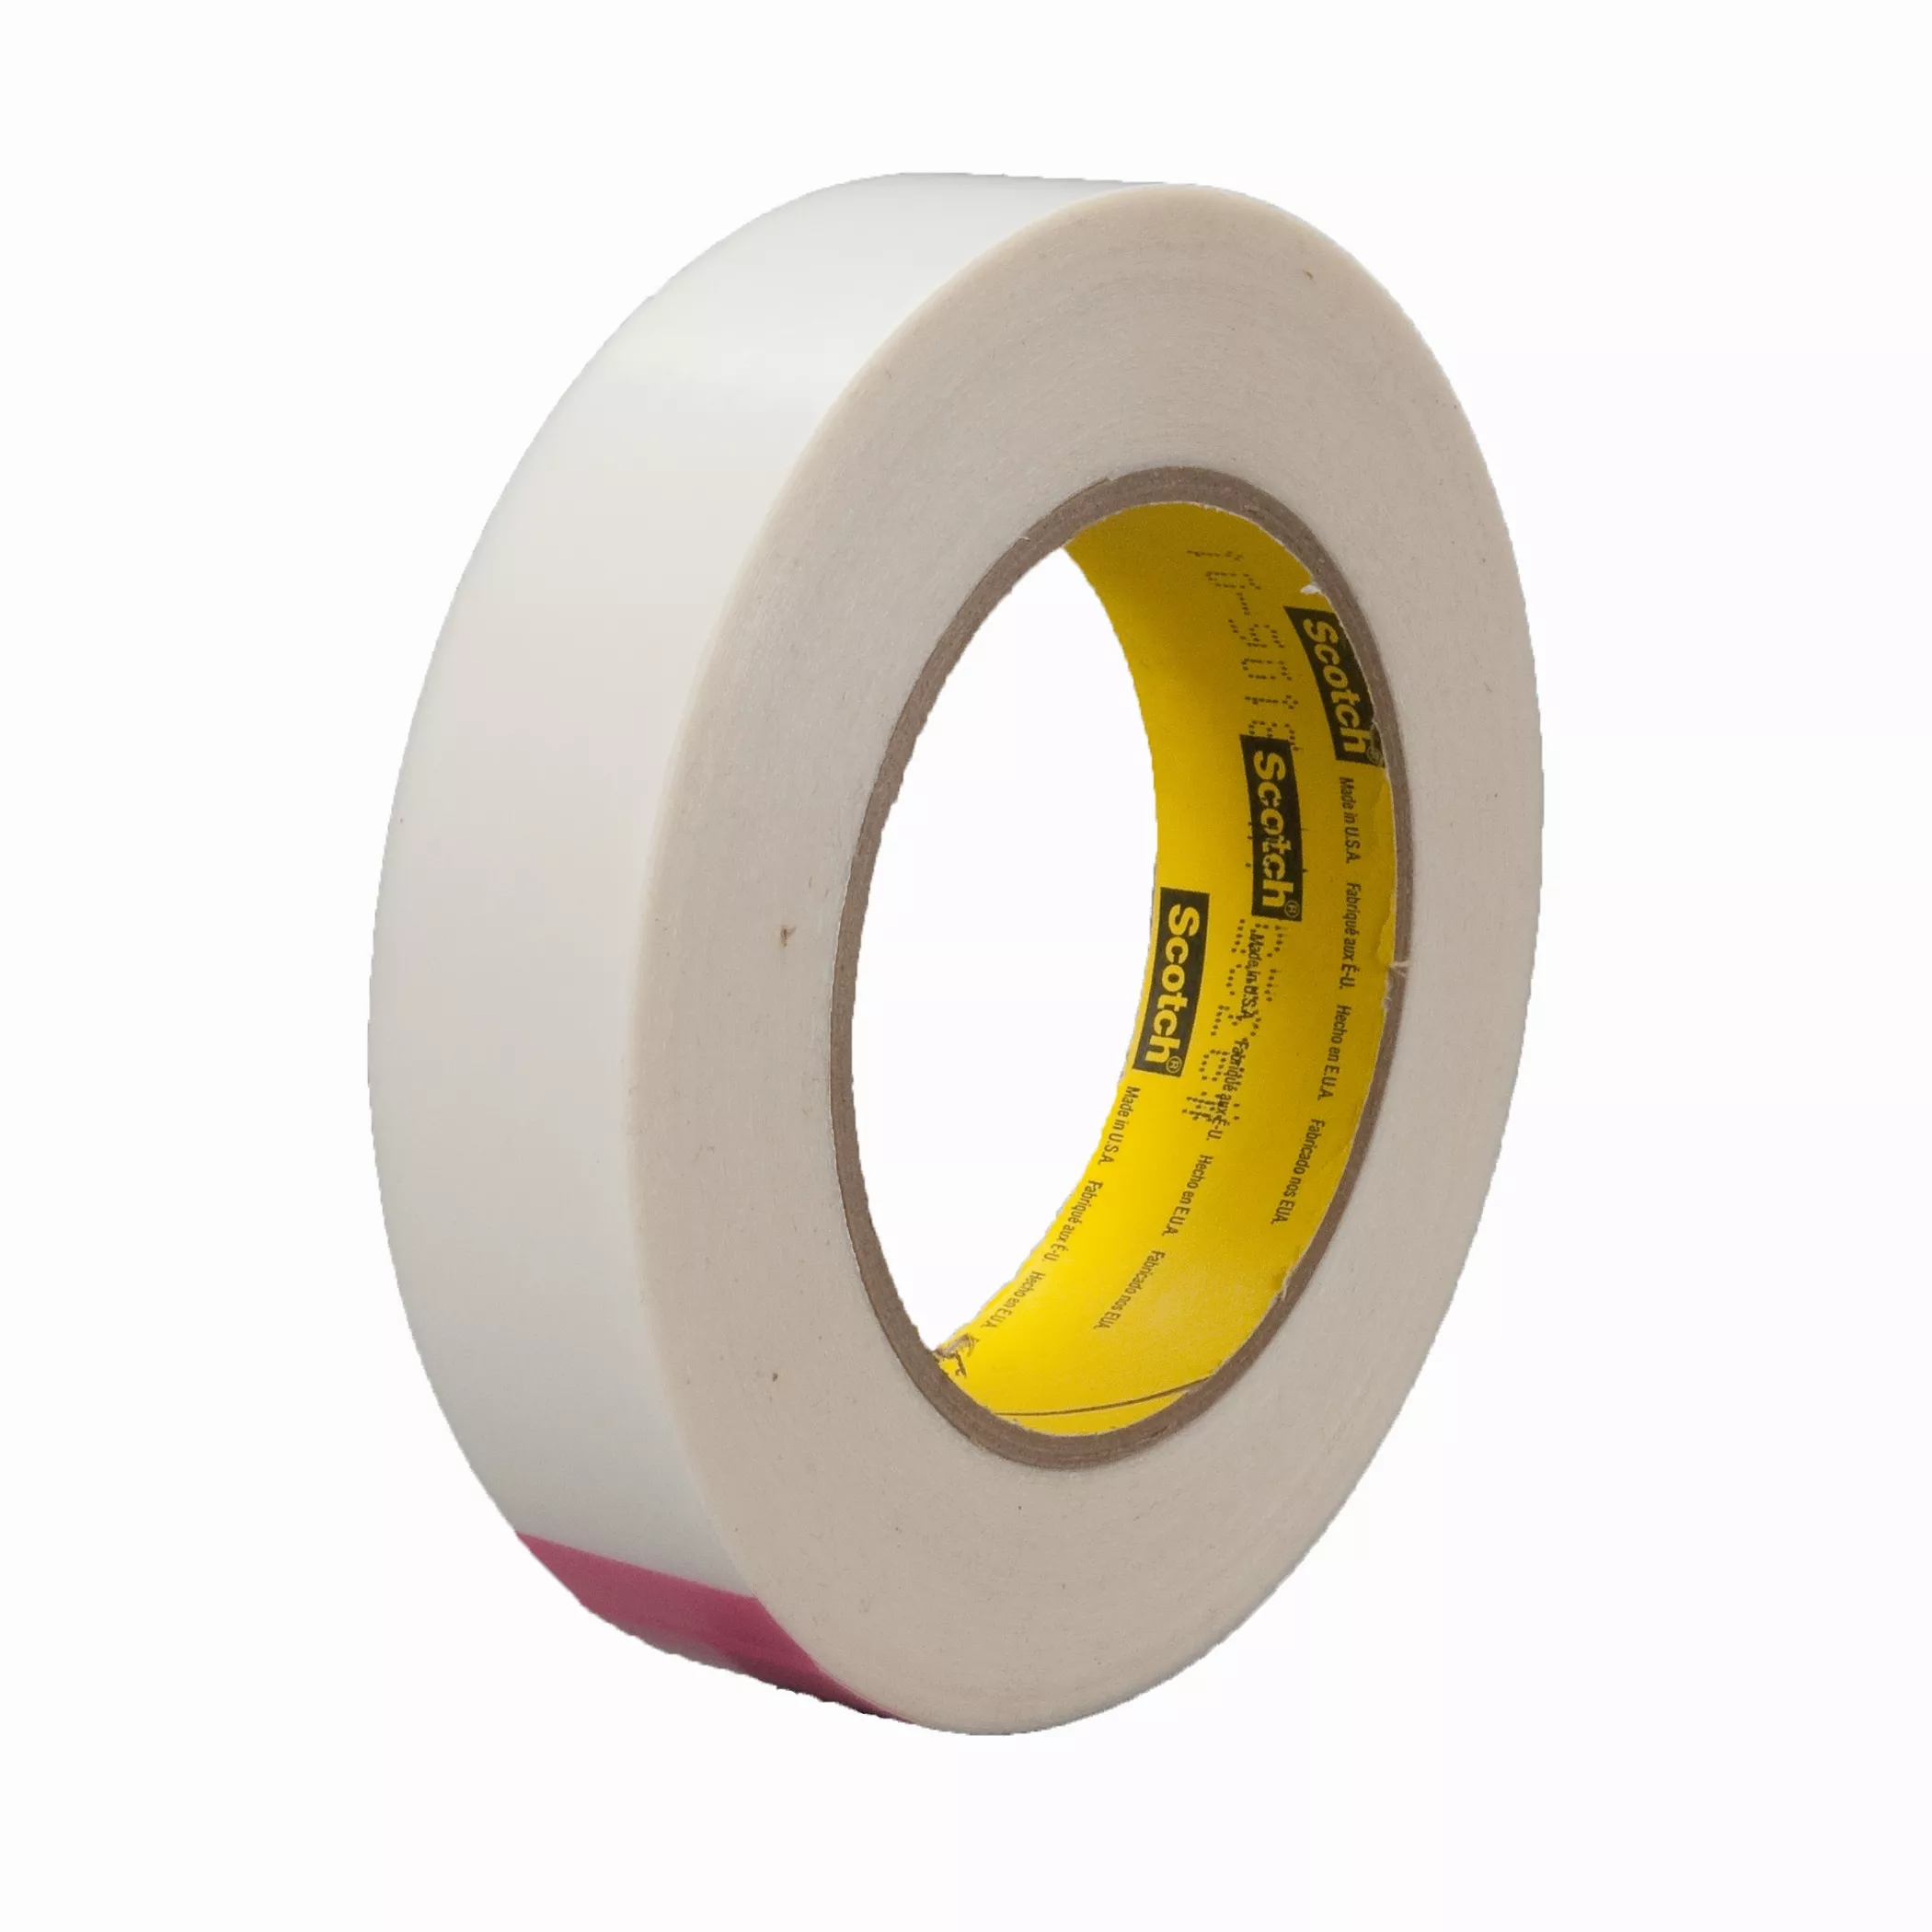 3M™ Squeak Reduction Tape 9325, Transparent, 24 in x 36 yd, 5.3 mil, 1
Roll/Case